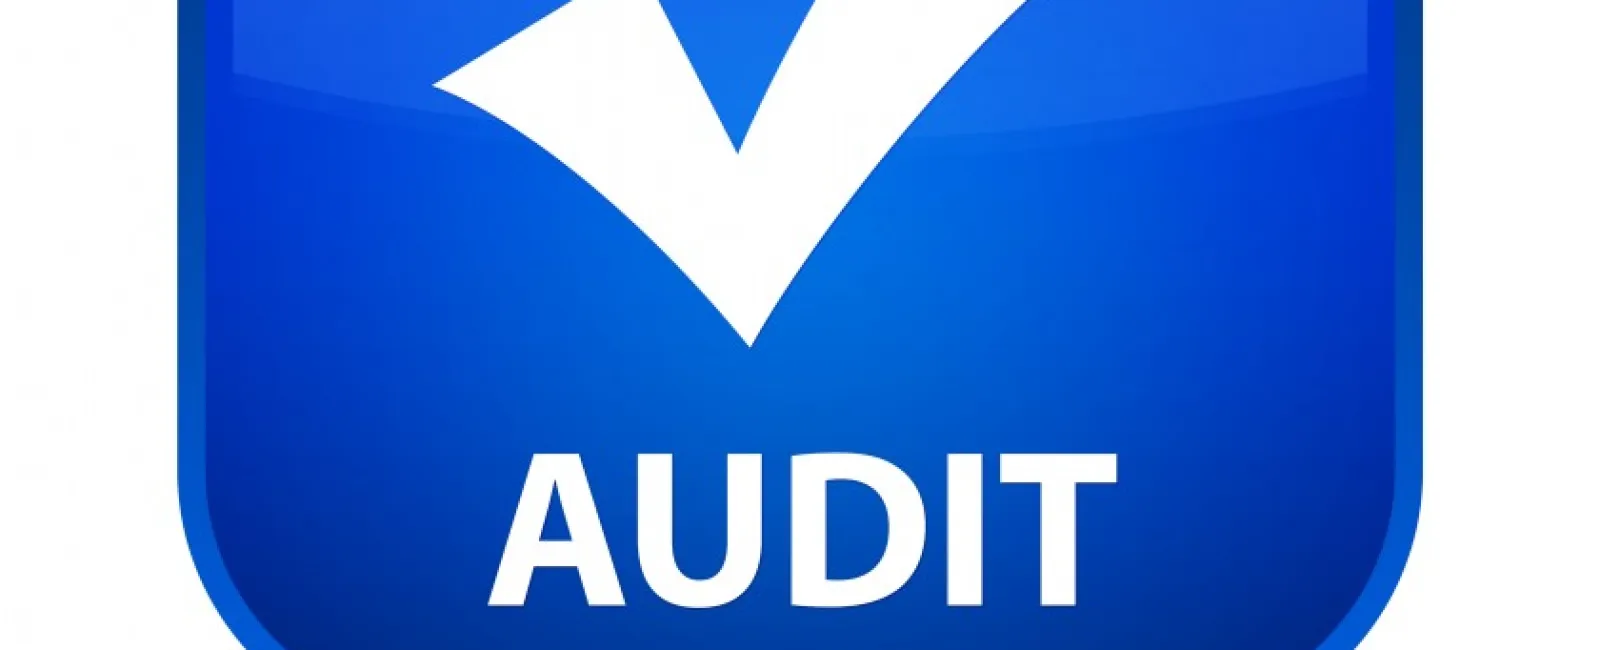 Are you prepared for a Medicare Audit?